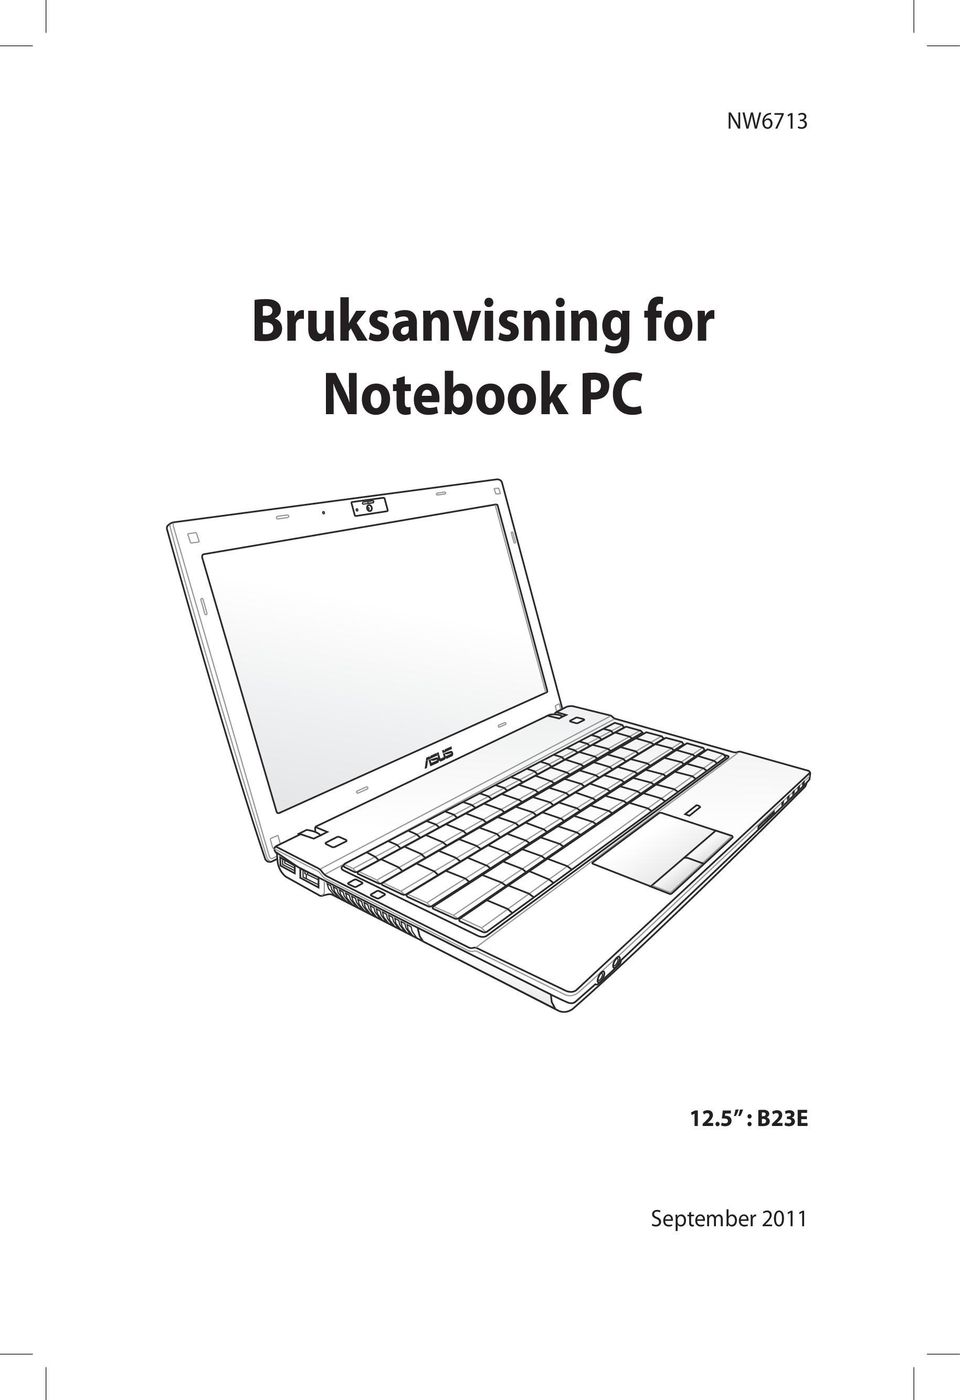 for Notebook PC